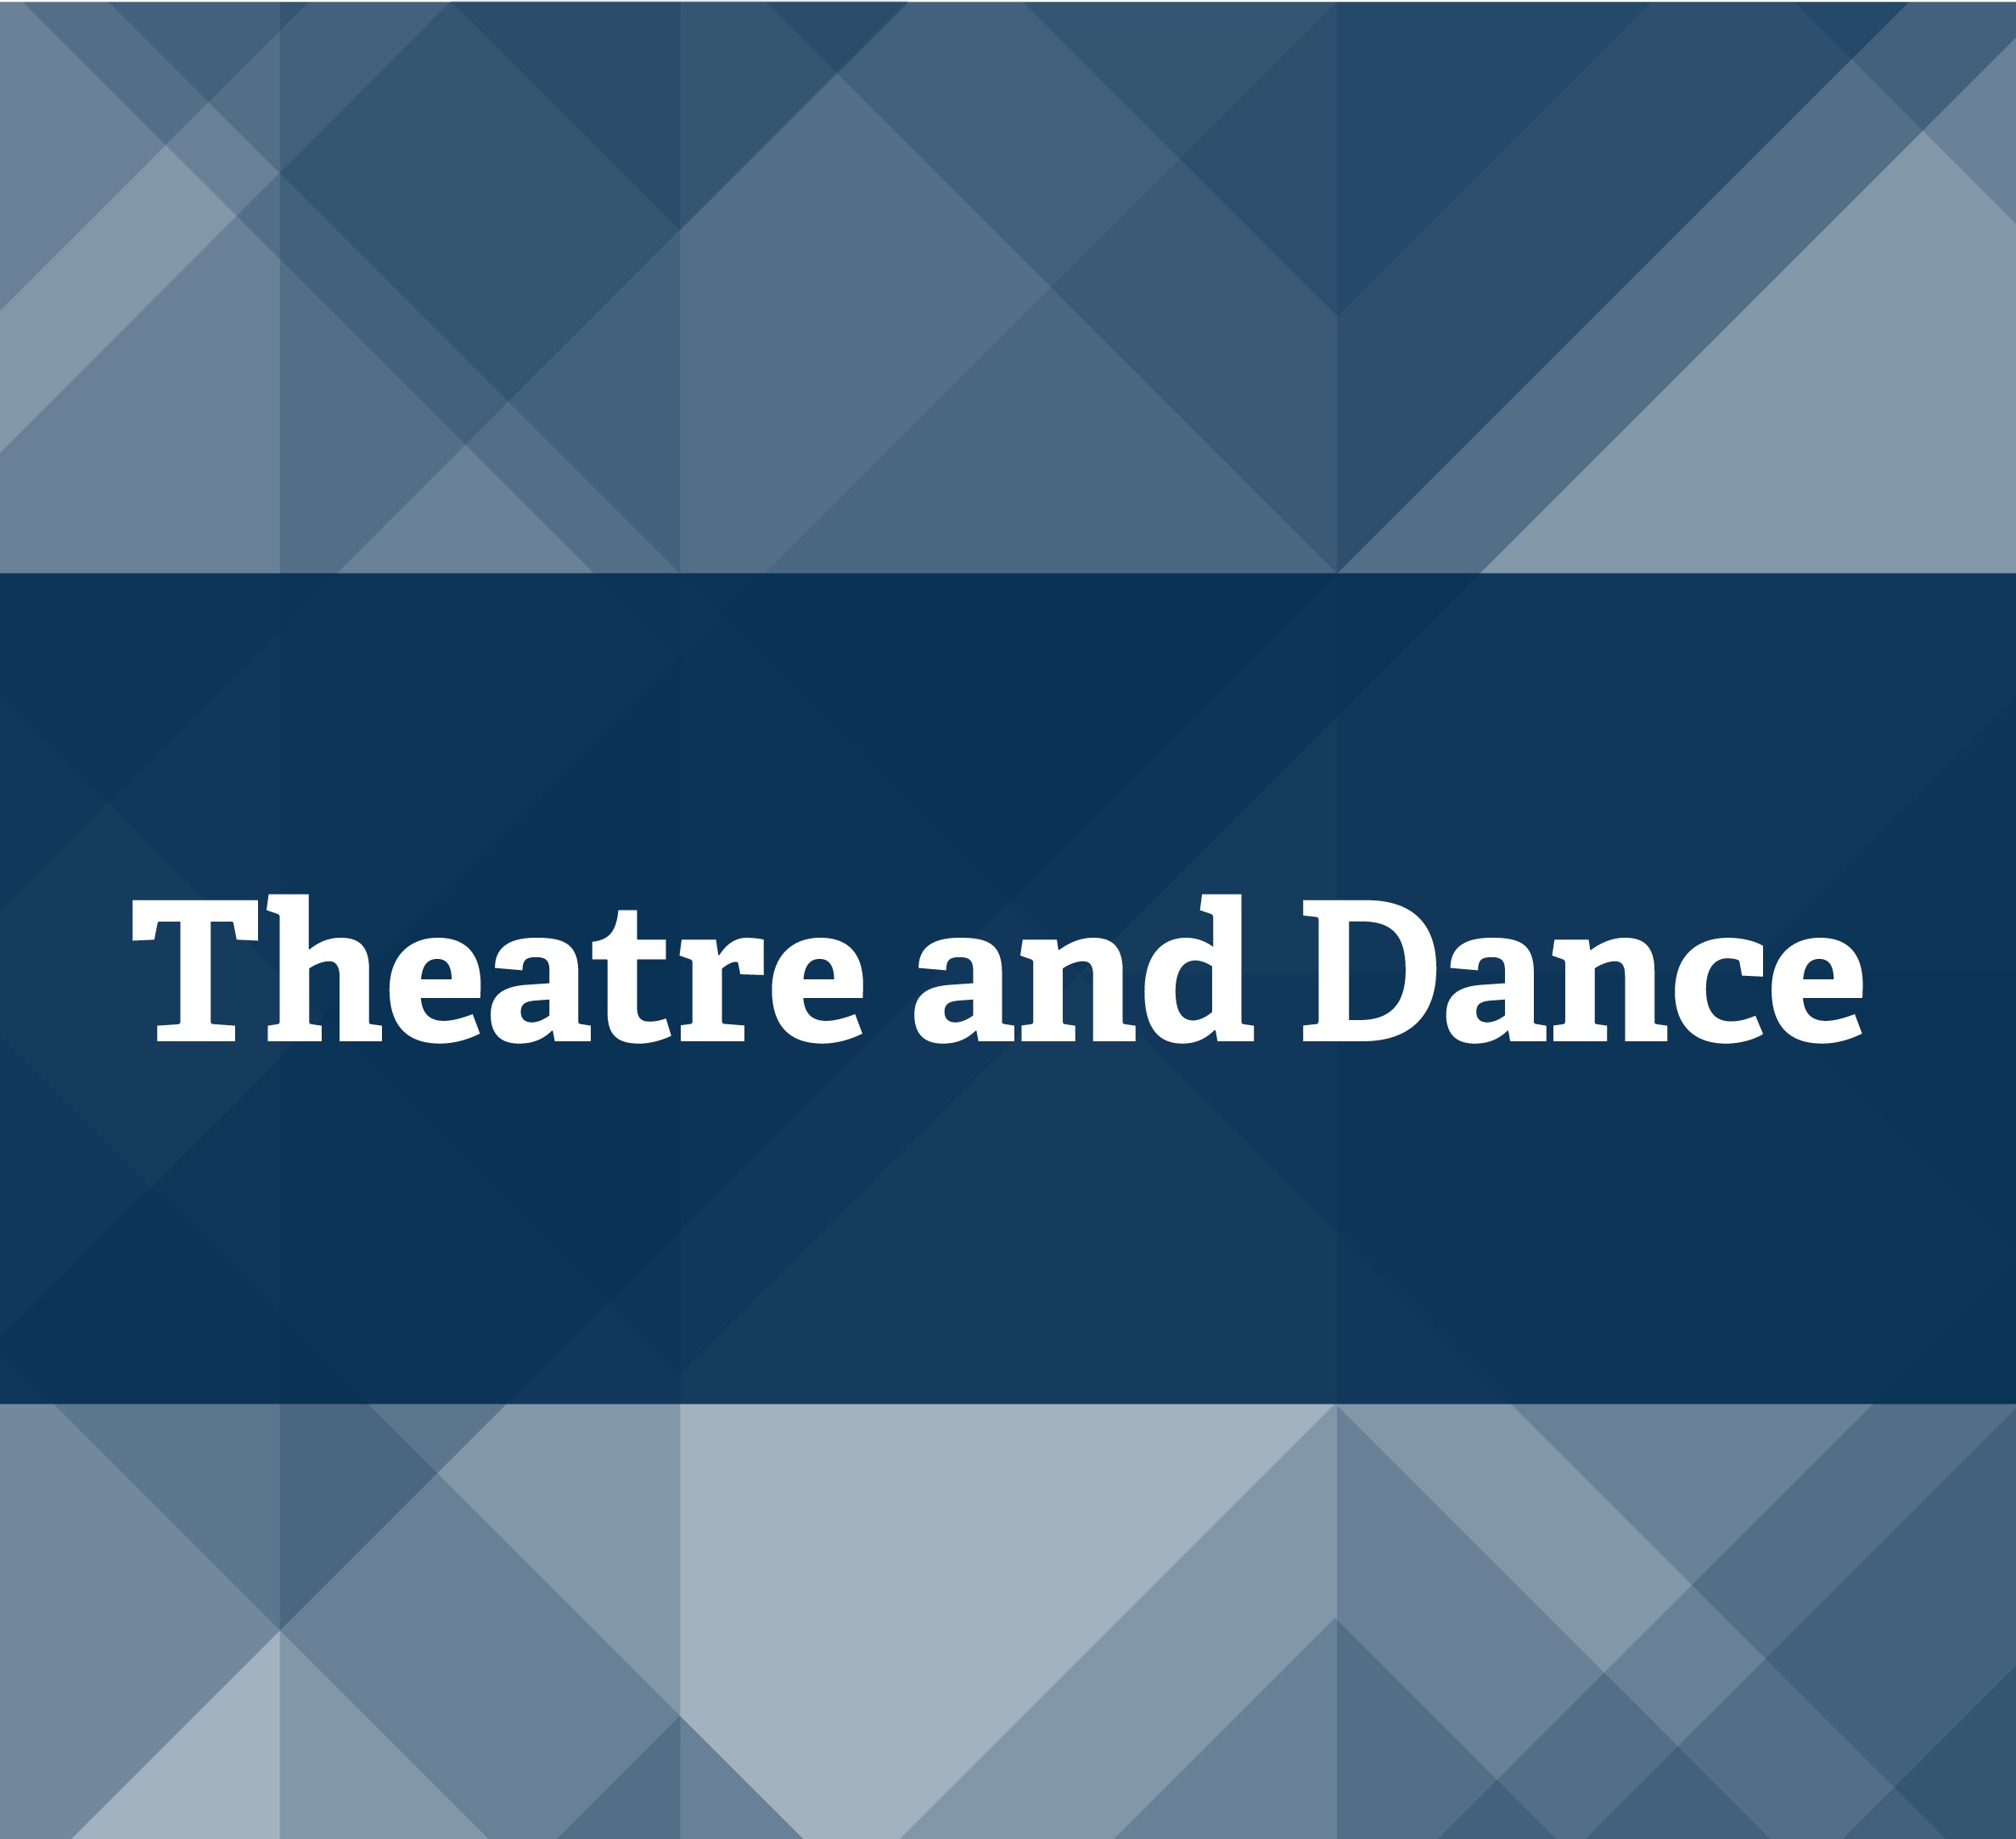 Theatre and Dance Basic Web Graphic